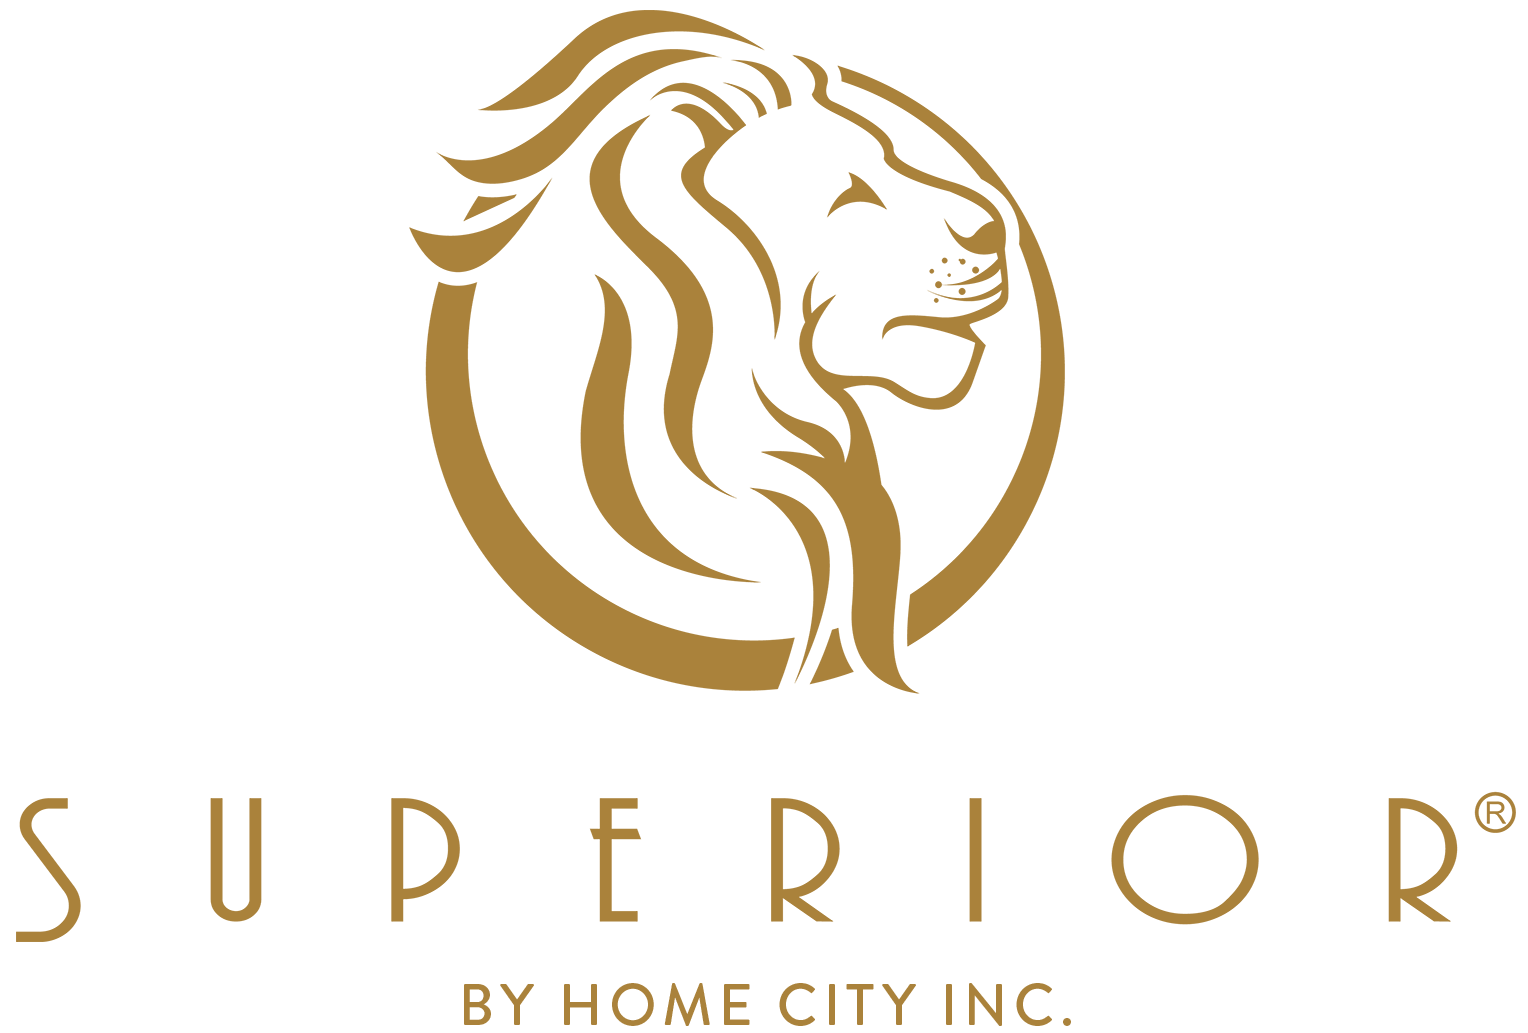 Home City Inc.’s Superior® Brand Expands Its Product Offerings and ...